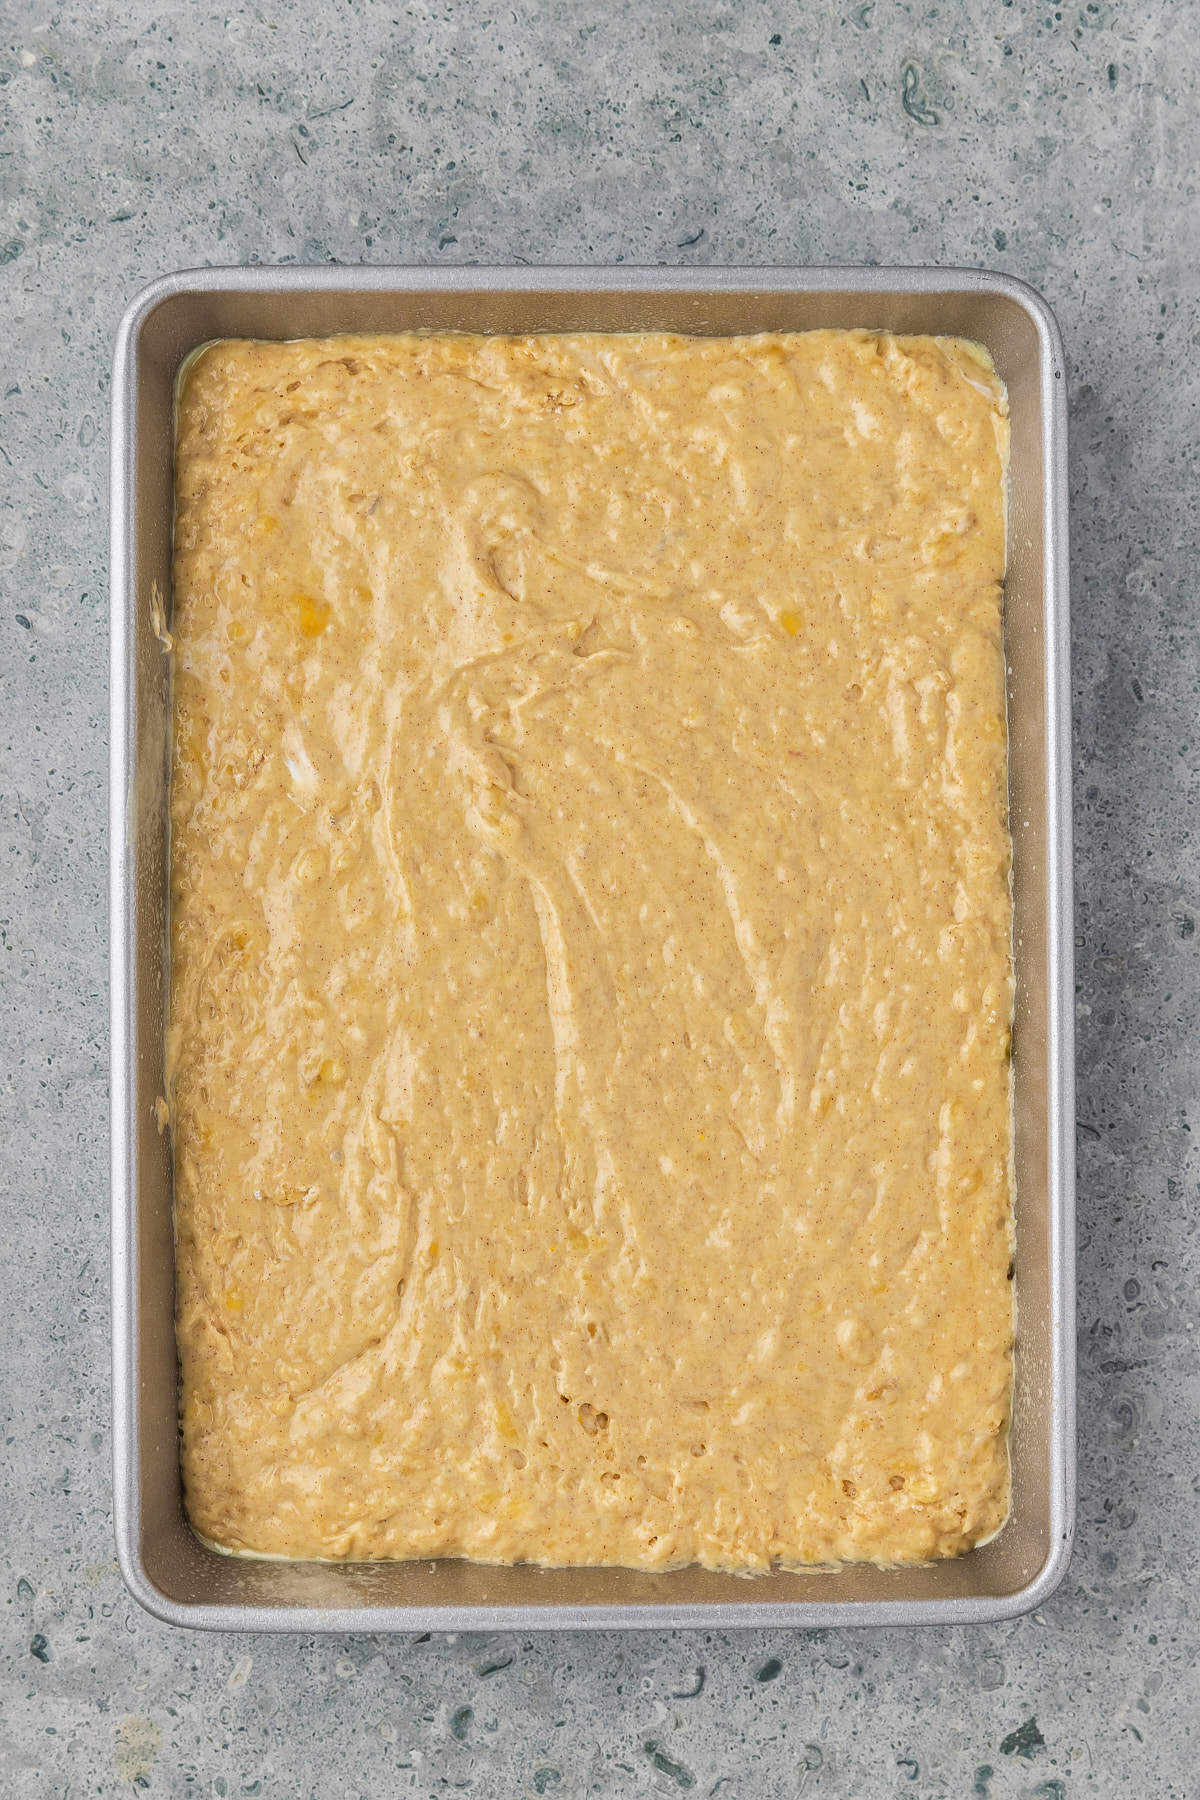 unbaked banana cake in a pan